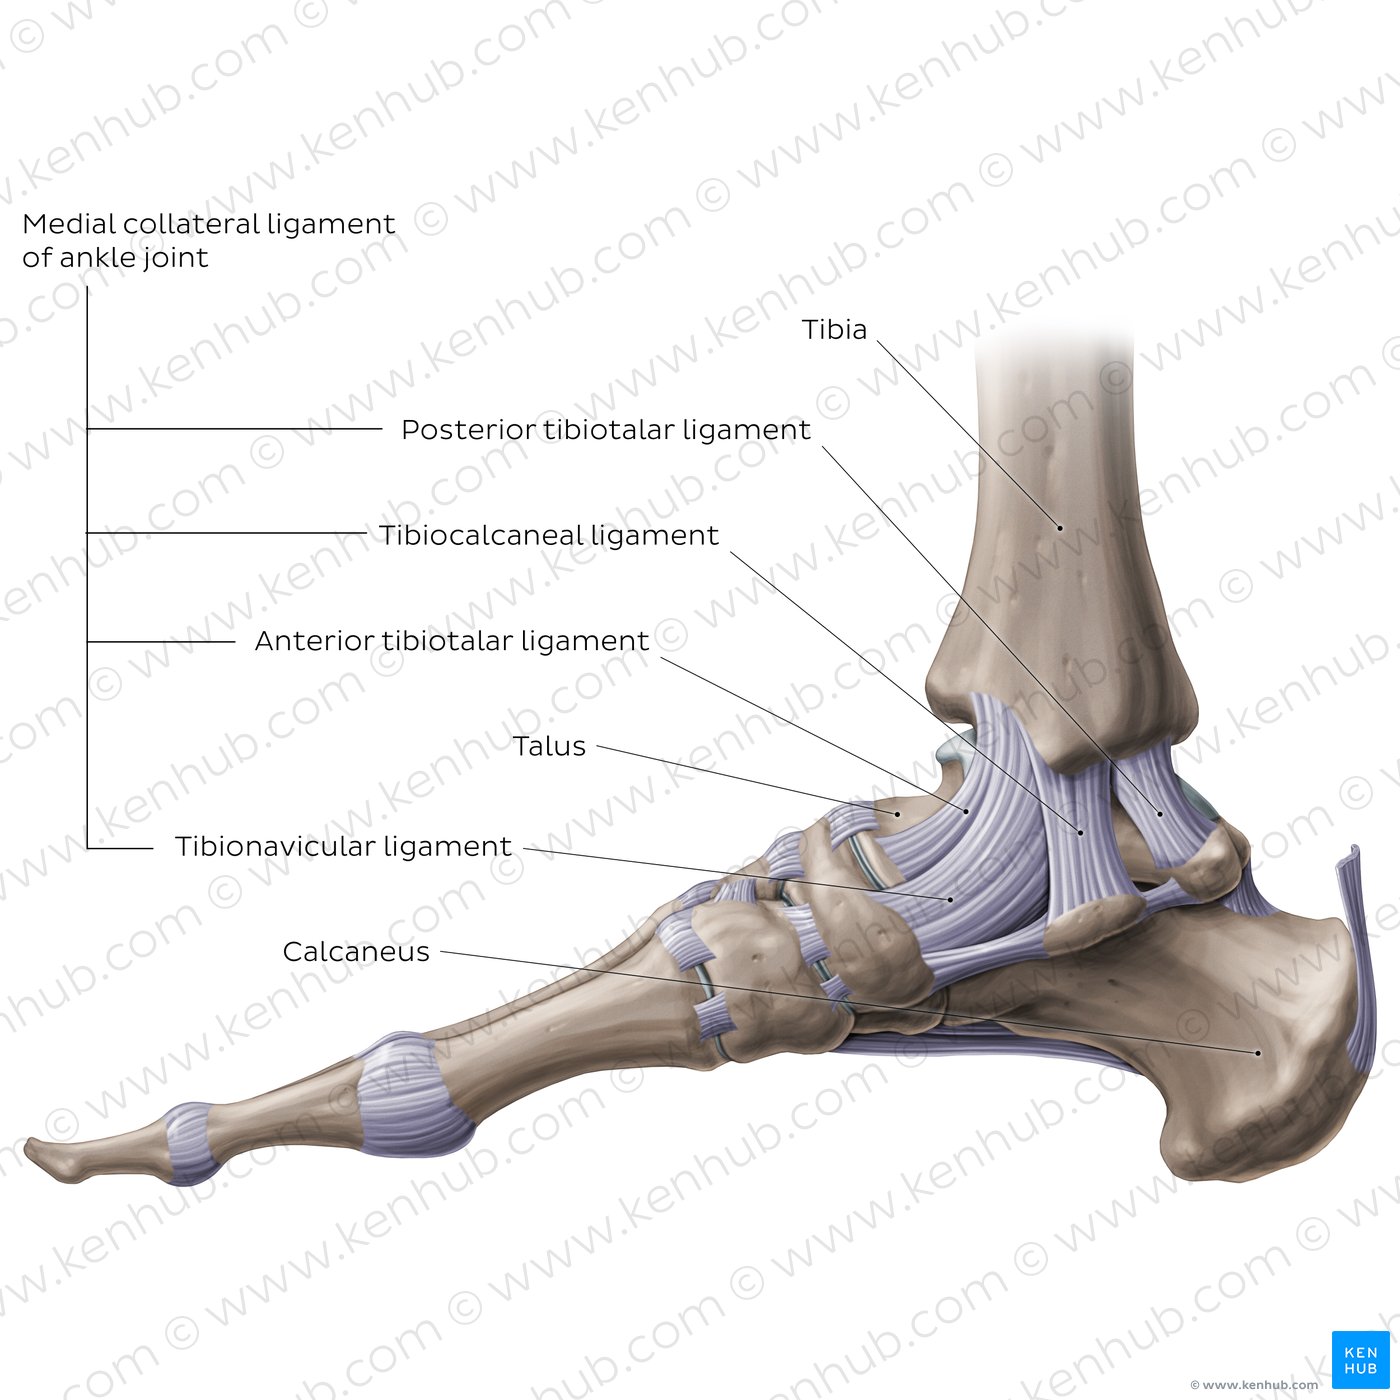 Anatomy of the ankle joint: Medial view